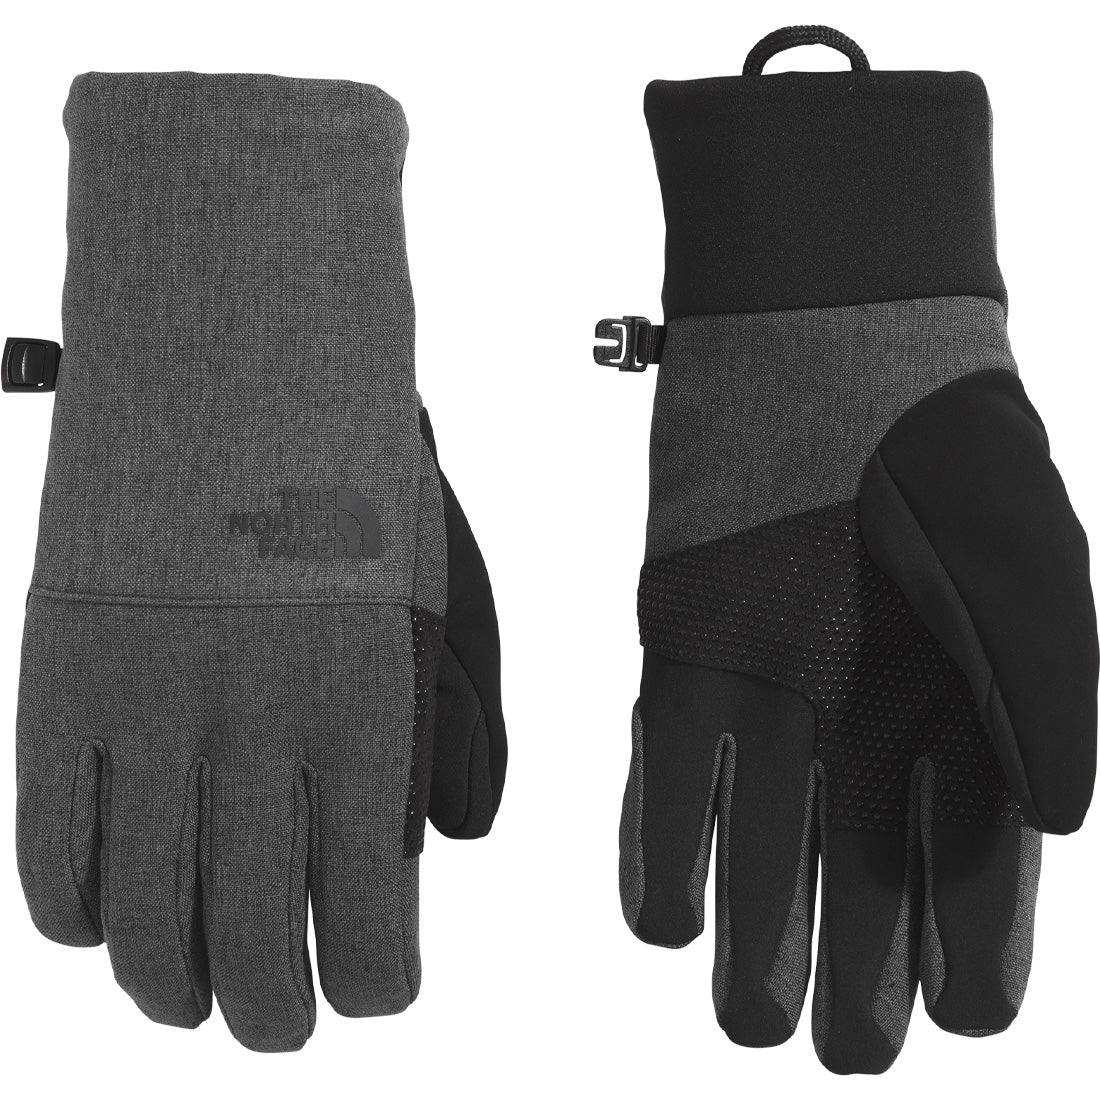 The North Face Apex Insulated Etip Glove - Men's